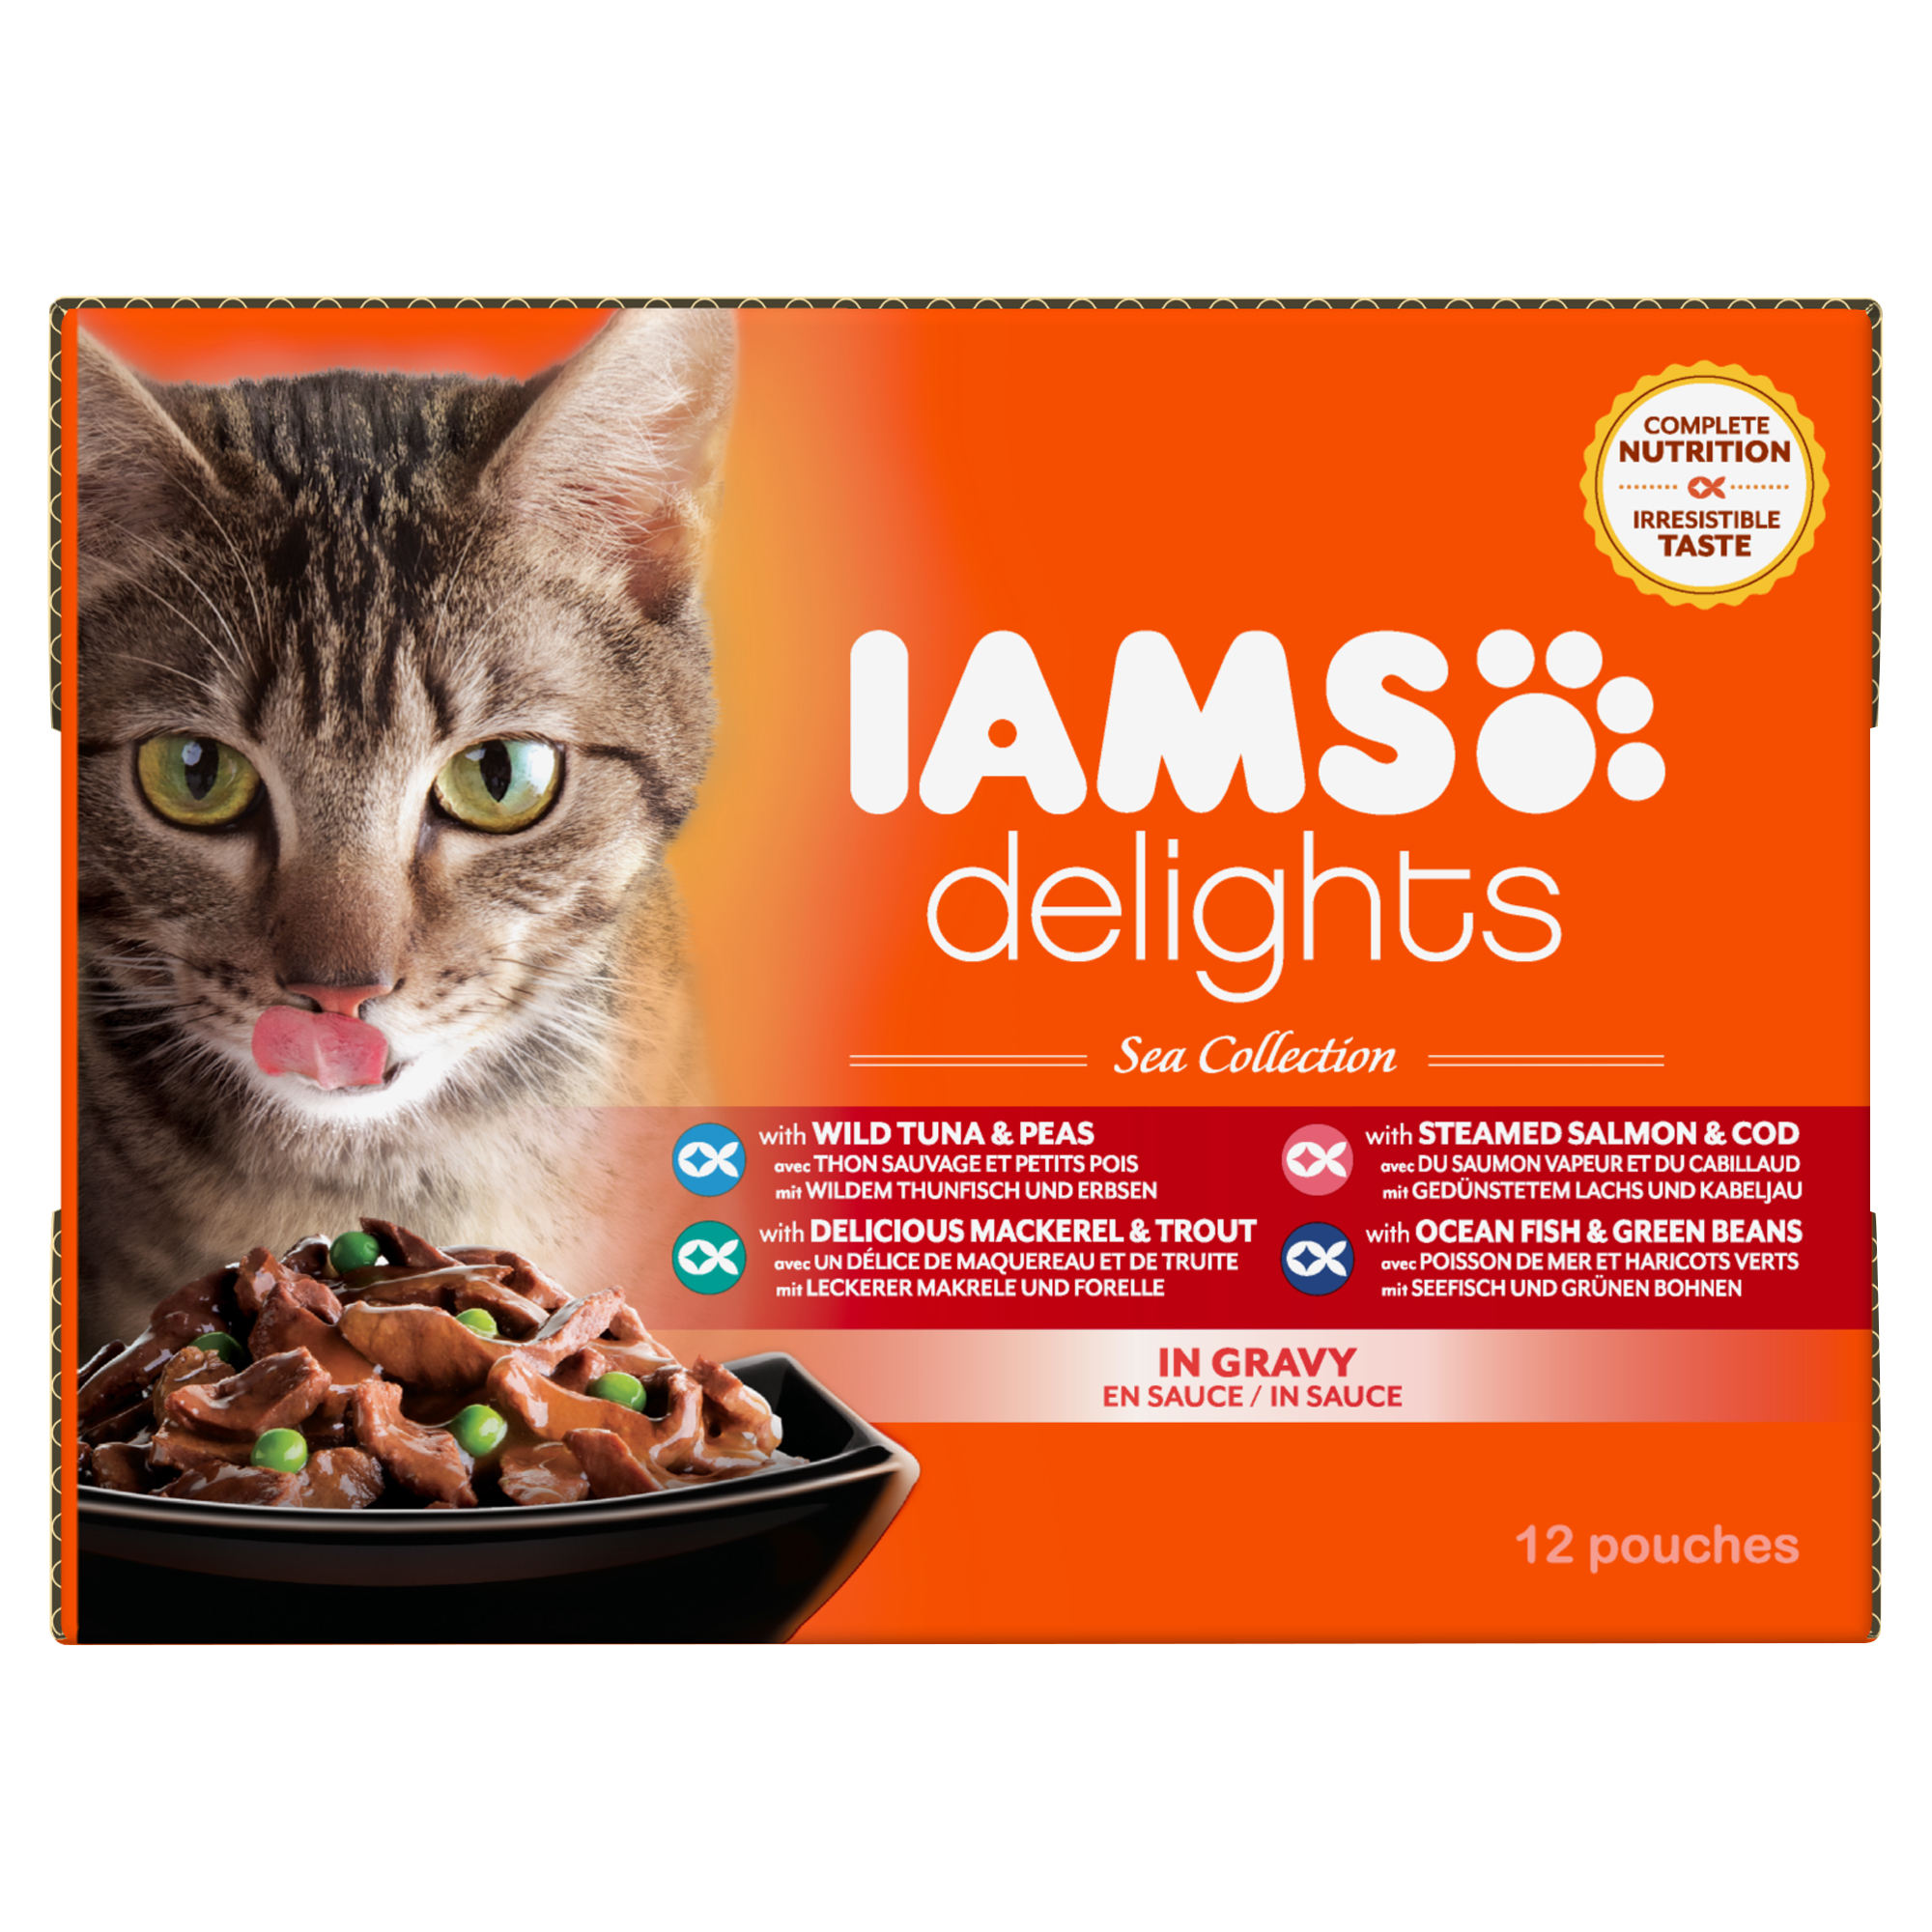 Iams pouch 12-pack sea collection in gravy - Product shot